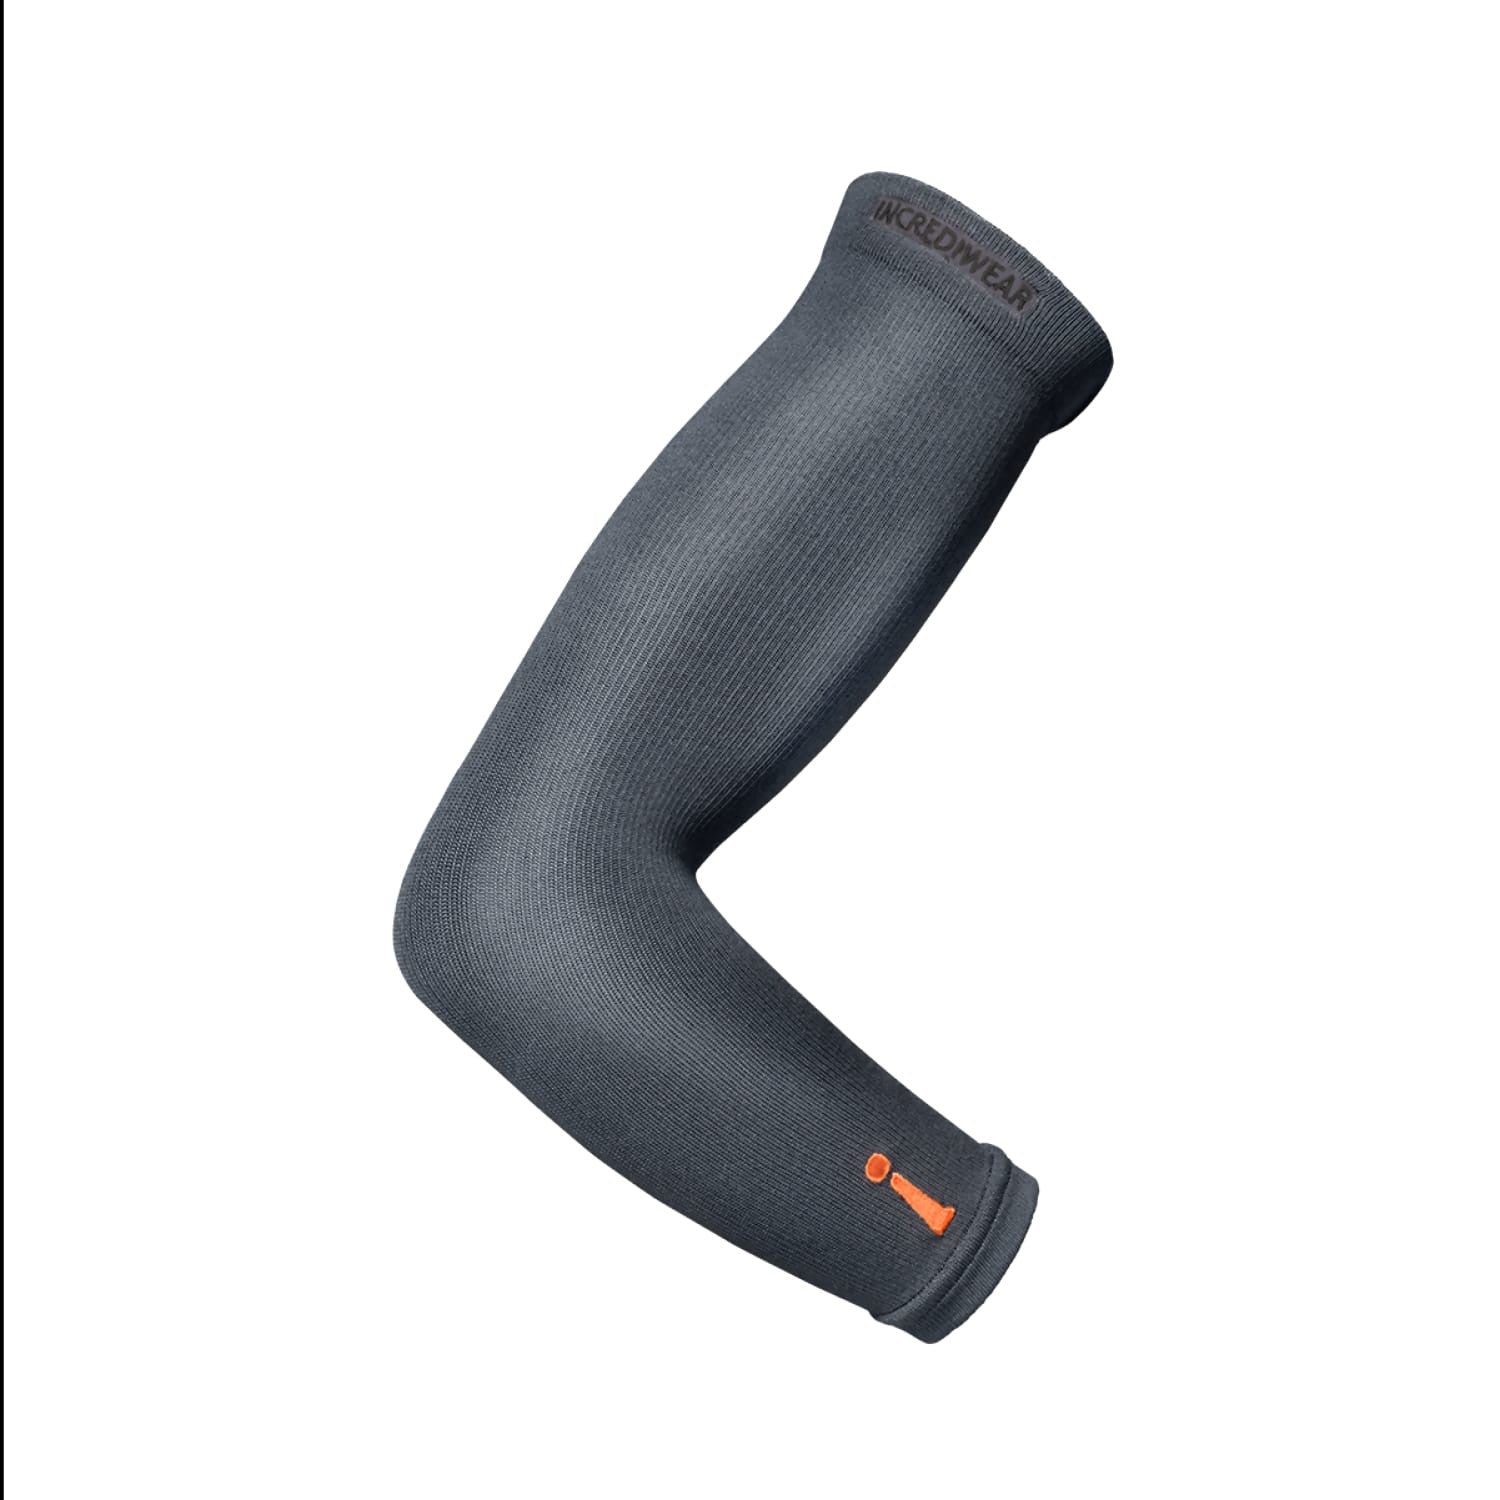 Incrediwear Arm Sleeve | Relieve Joint Pain charcoal front